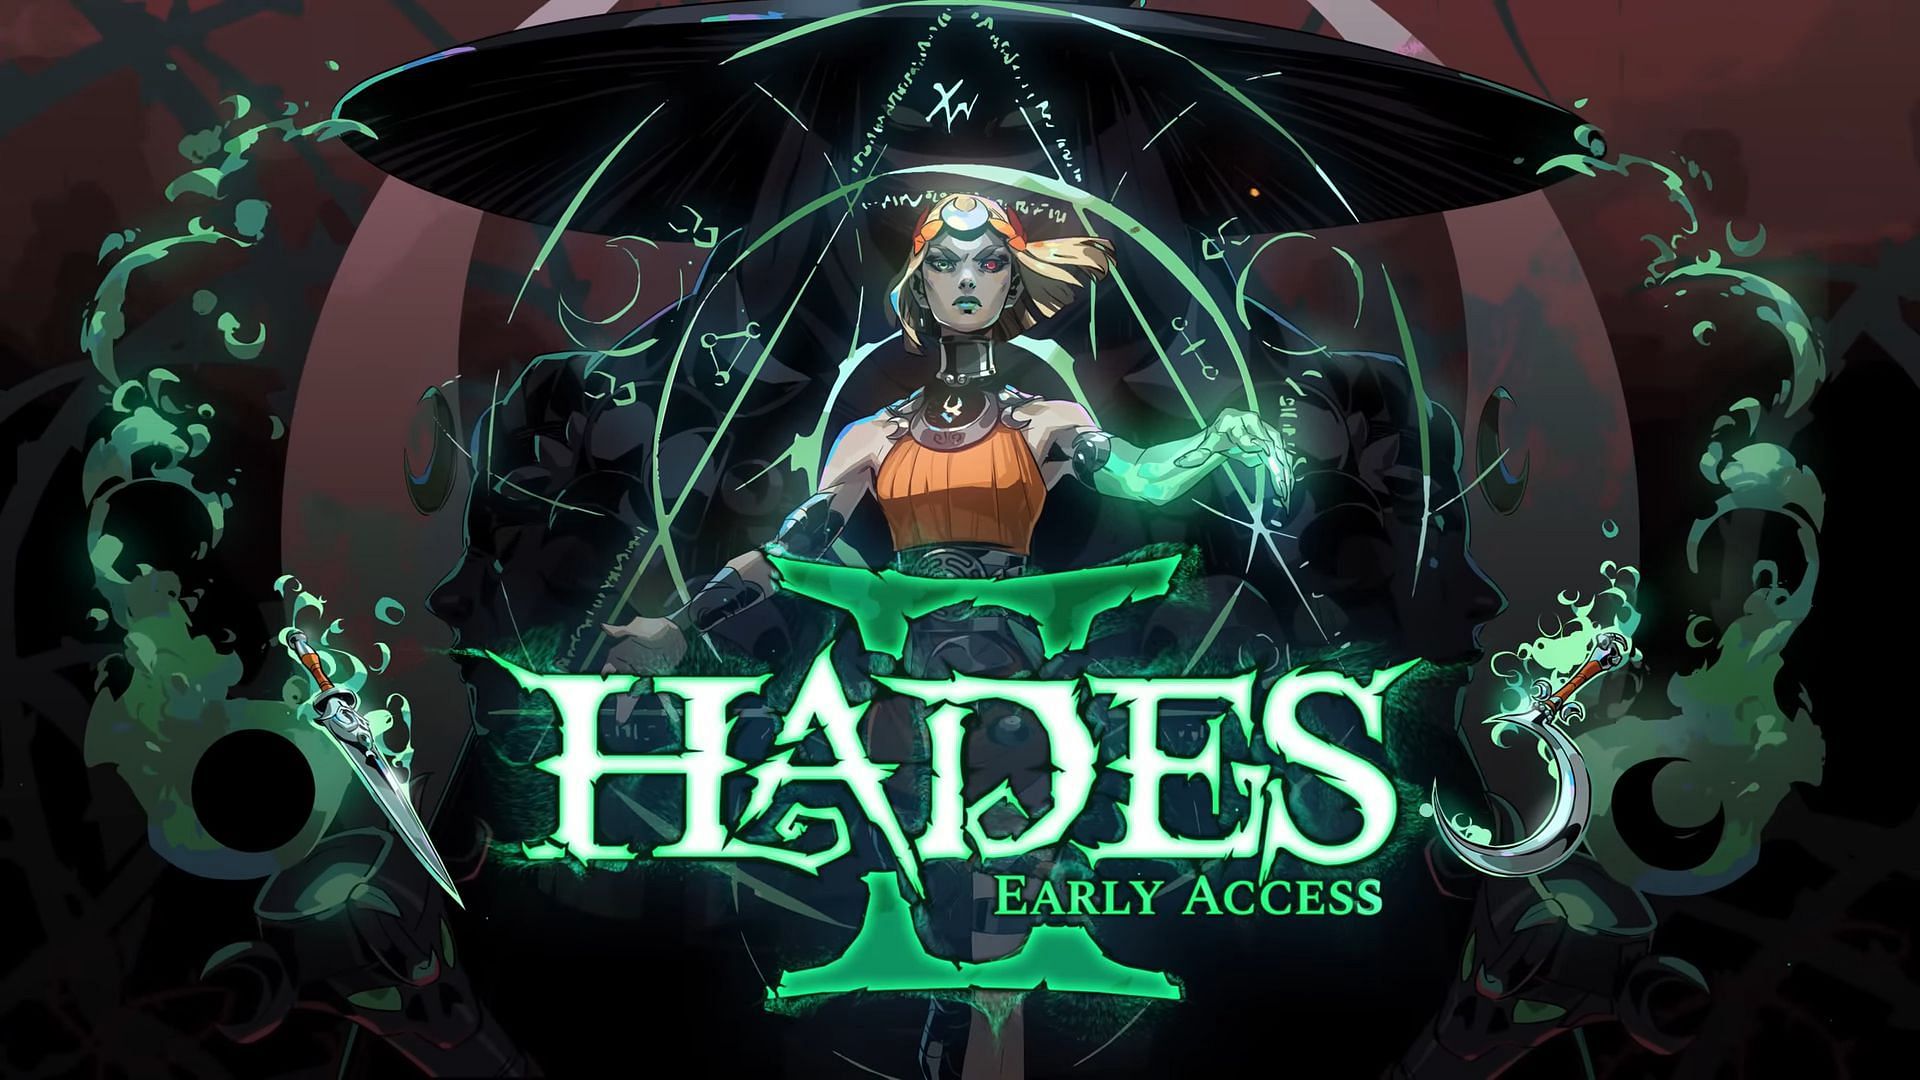 Hades 2 is now available in Early Access.